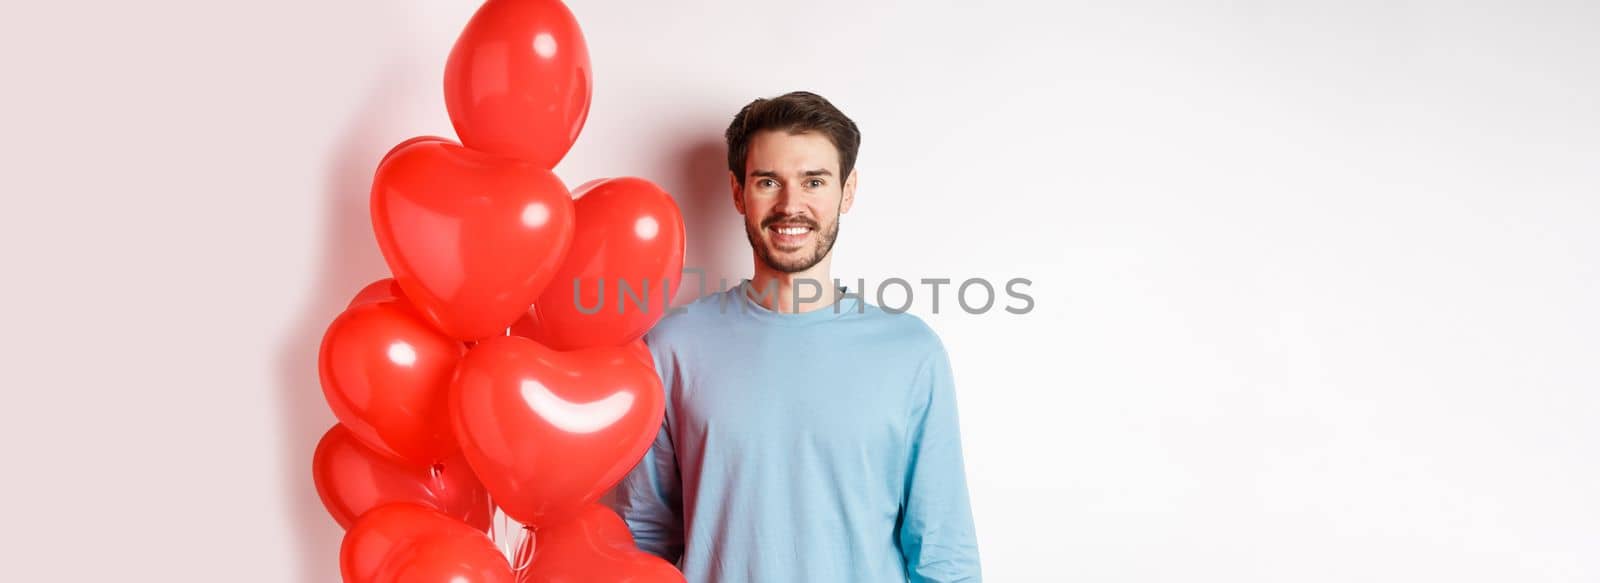 Smiling young man standing with heart balloons and looking happy, celebrating valentines day, bring romantic present to lover, standing over white background.